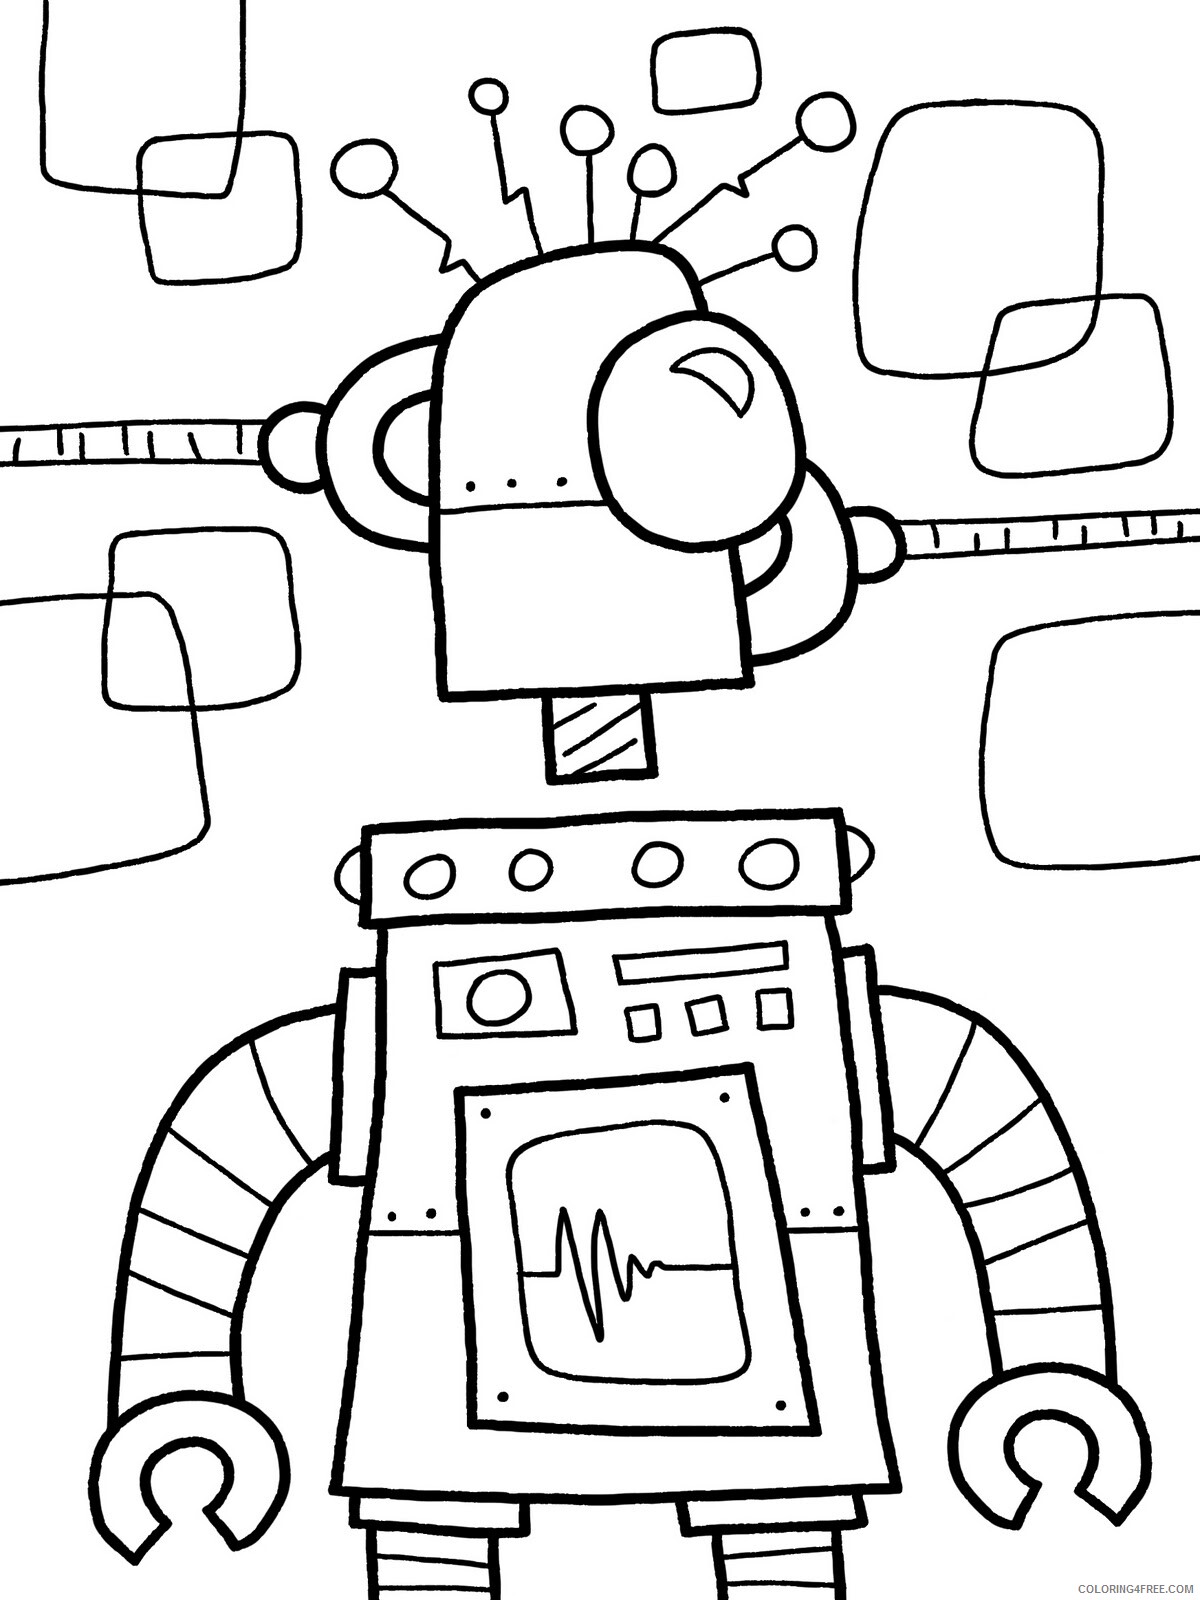 Robots Coloring Pages for boys Free Robot Printable 2020 0835 Coloring4free